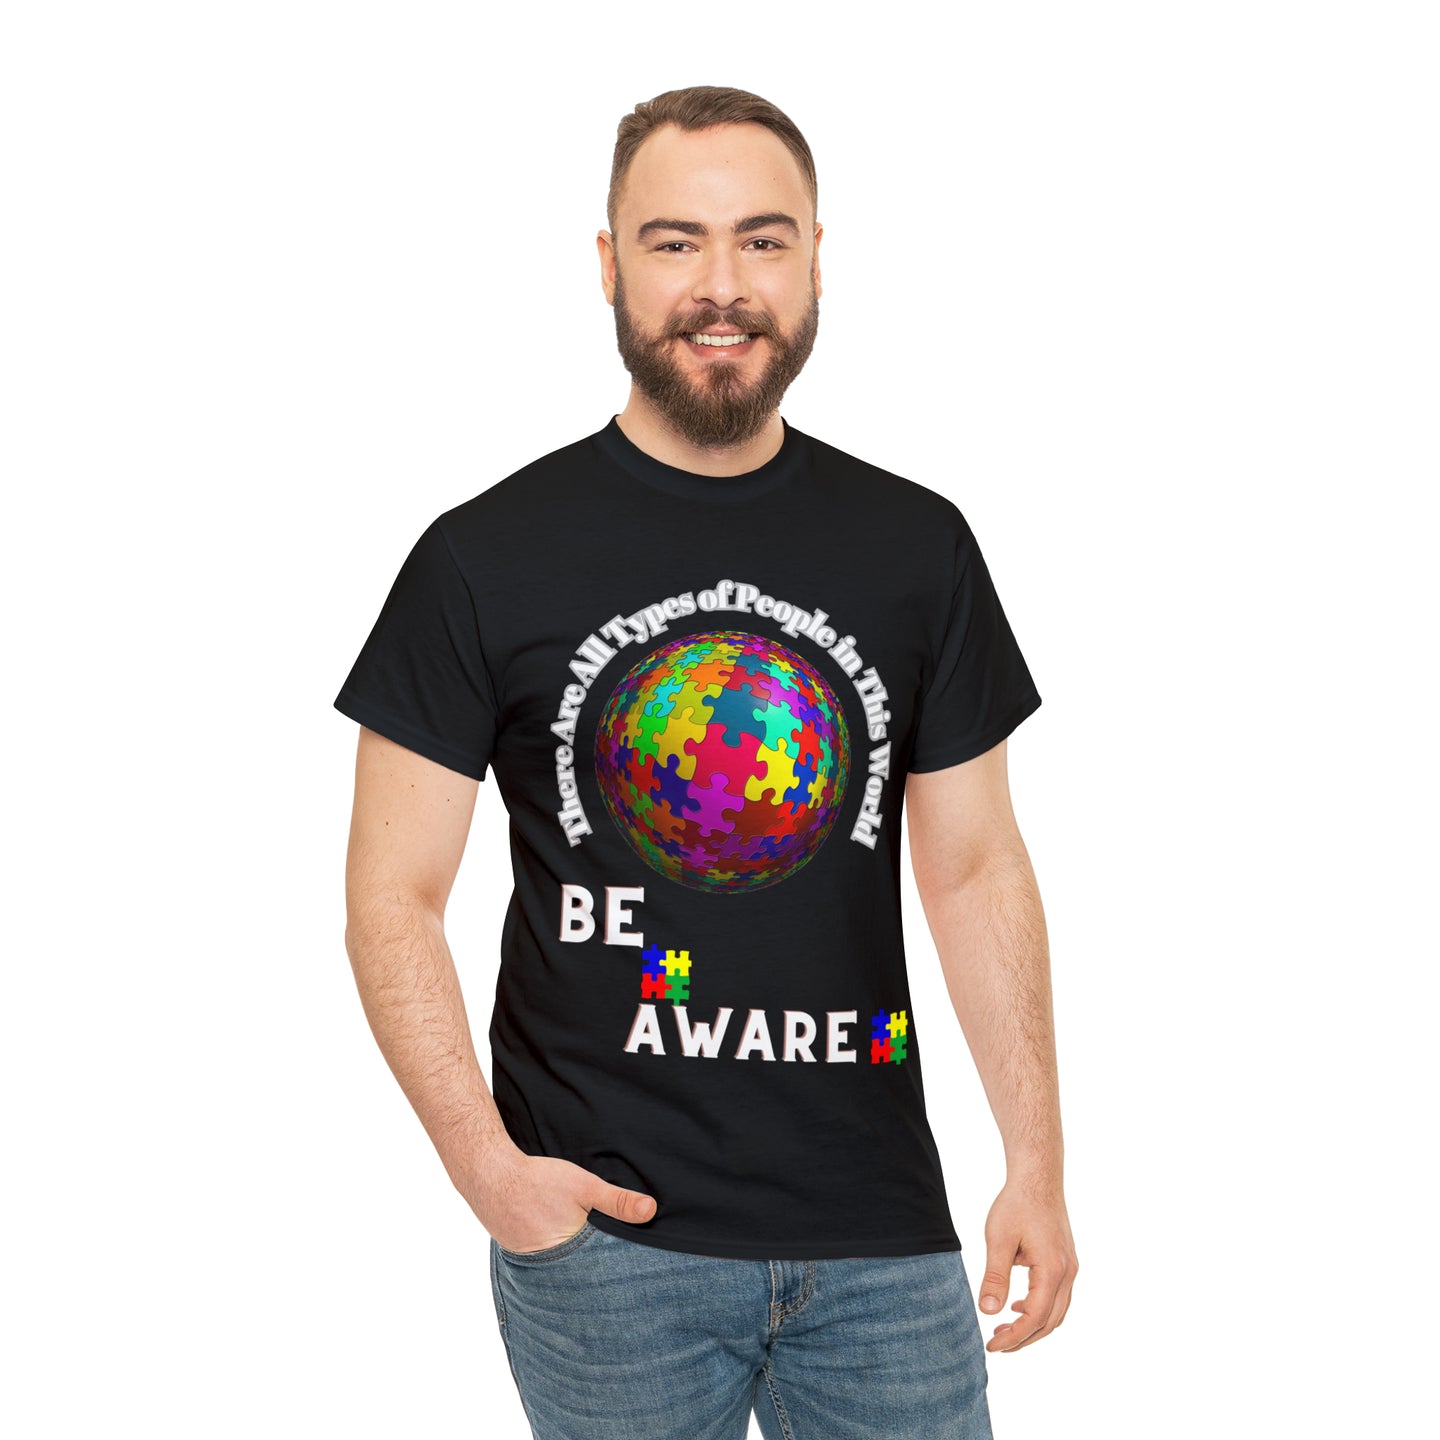 Autism Awareness Unisex All Types of People in this World Be Aware T-Shirt